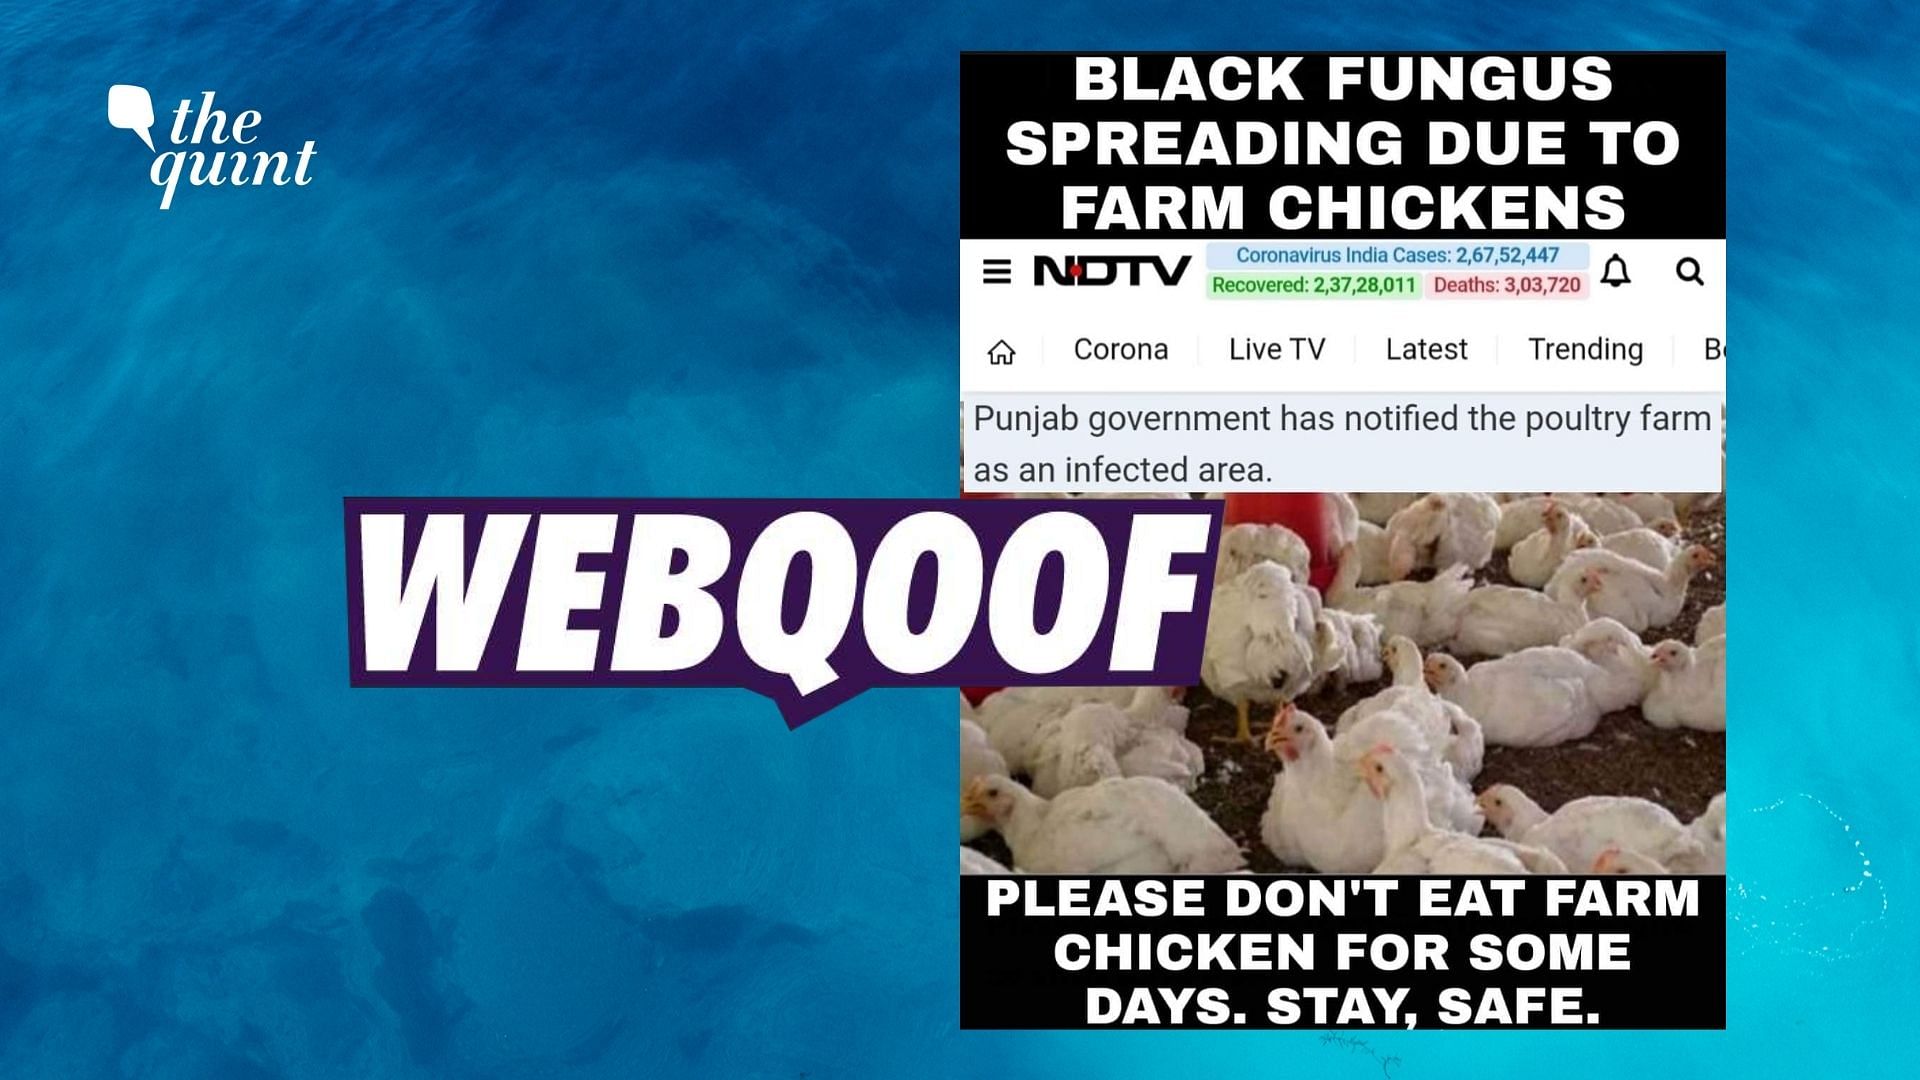 The viral claim that farm chickens are spreading black fungus has no scientific backing.